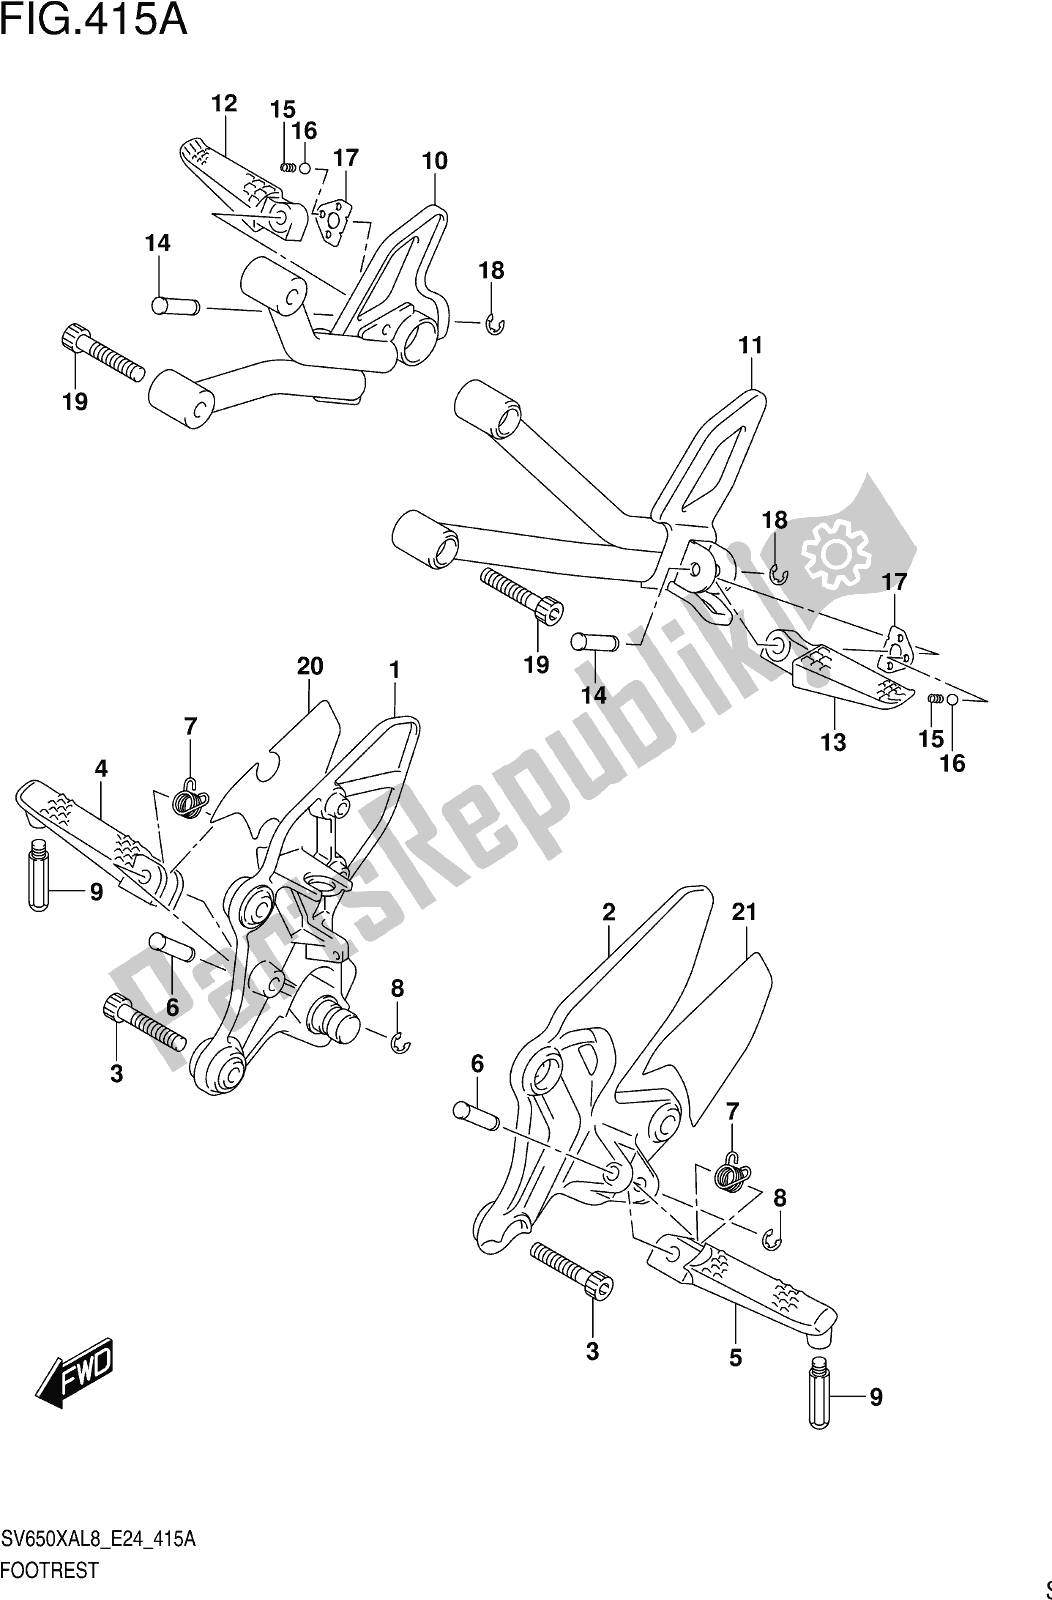 All parts for the Fig. 415a Footrest of the Suzuki SV 650 XA 2018